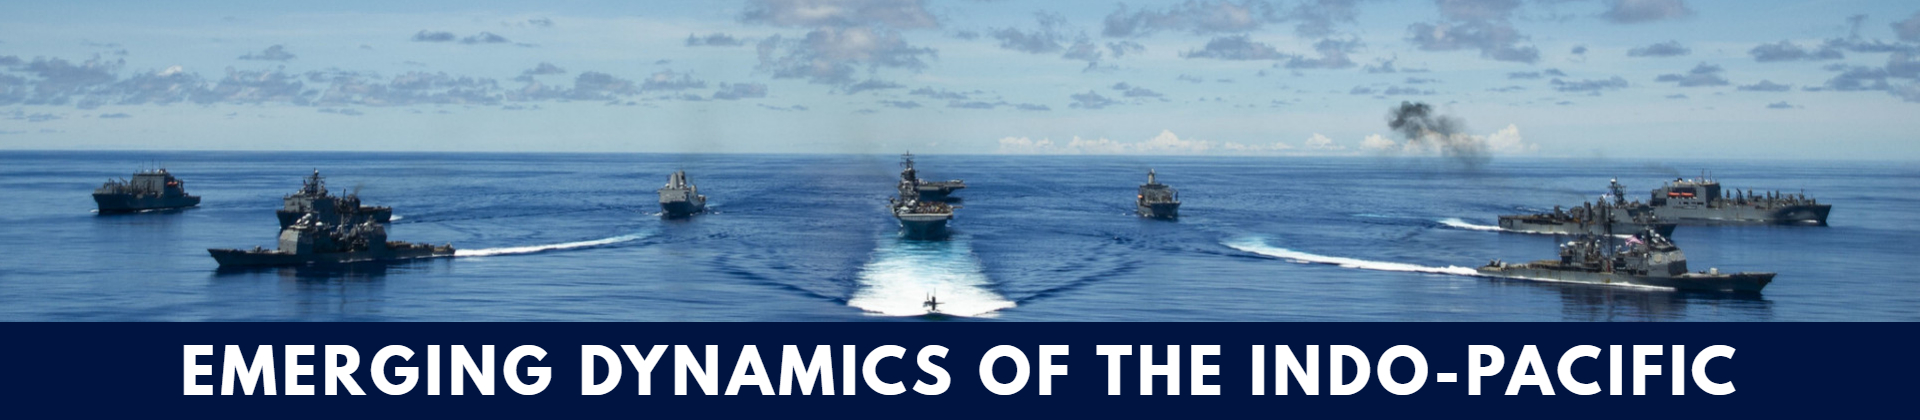 Emerging dynamics of the Indo-Pacific